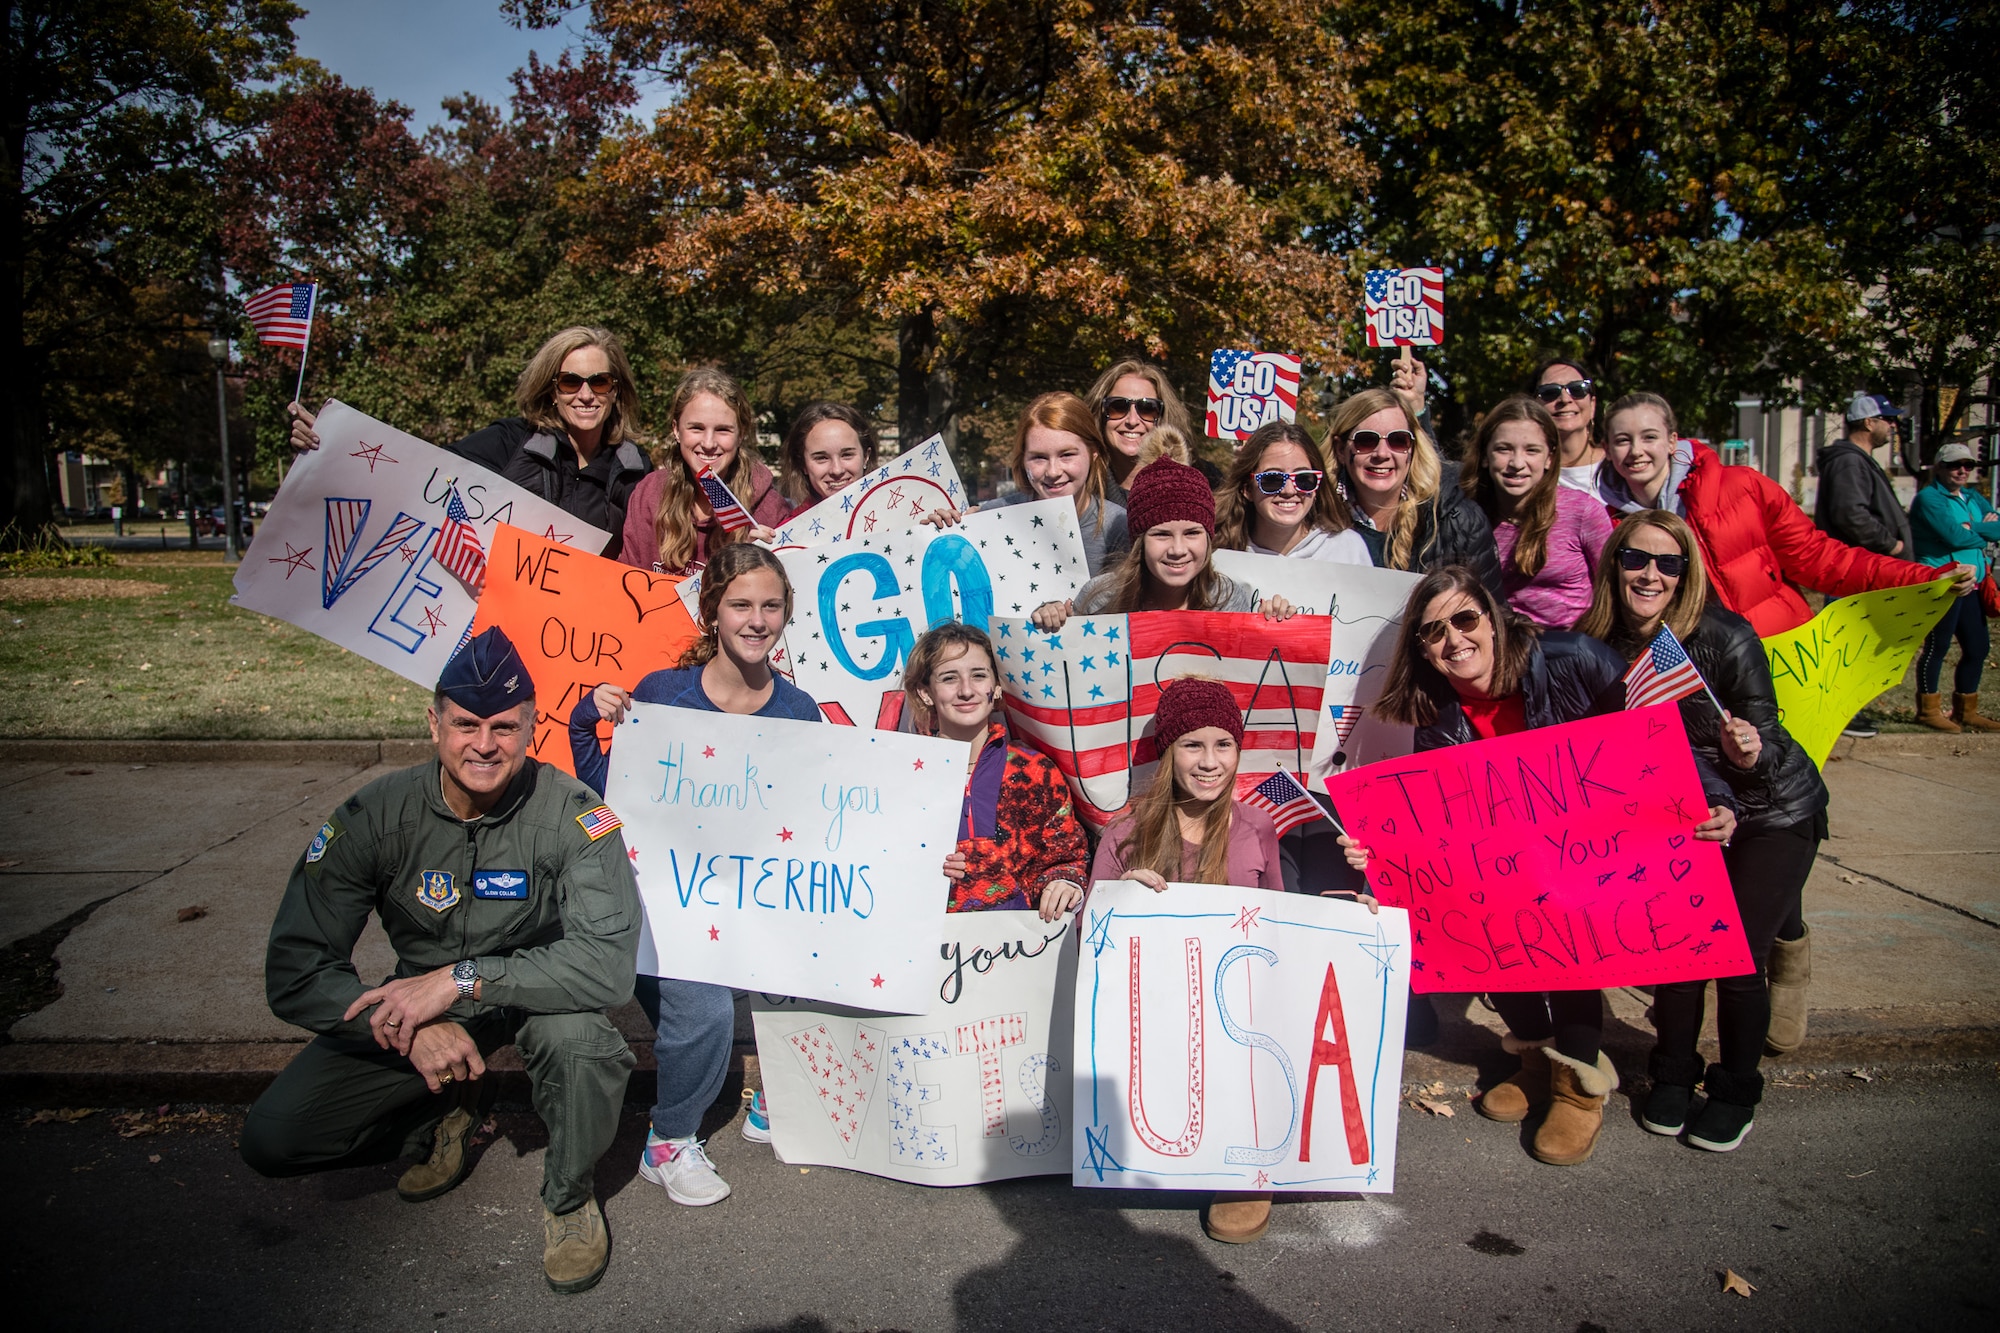 Col. Glenn Collins, commander, 932nd Airlift Wing, takes a photo moment and poses with attendees at the St. Louis Veterans Day Parade, downtown St. Louis, Missouri, Nov. 9, 2019.(U.S. Air Force photo by Christopher Parr)